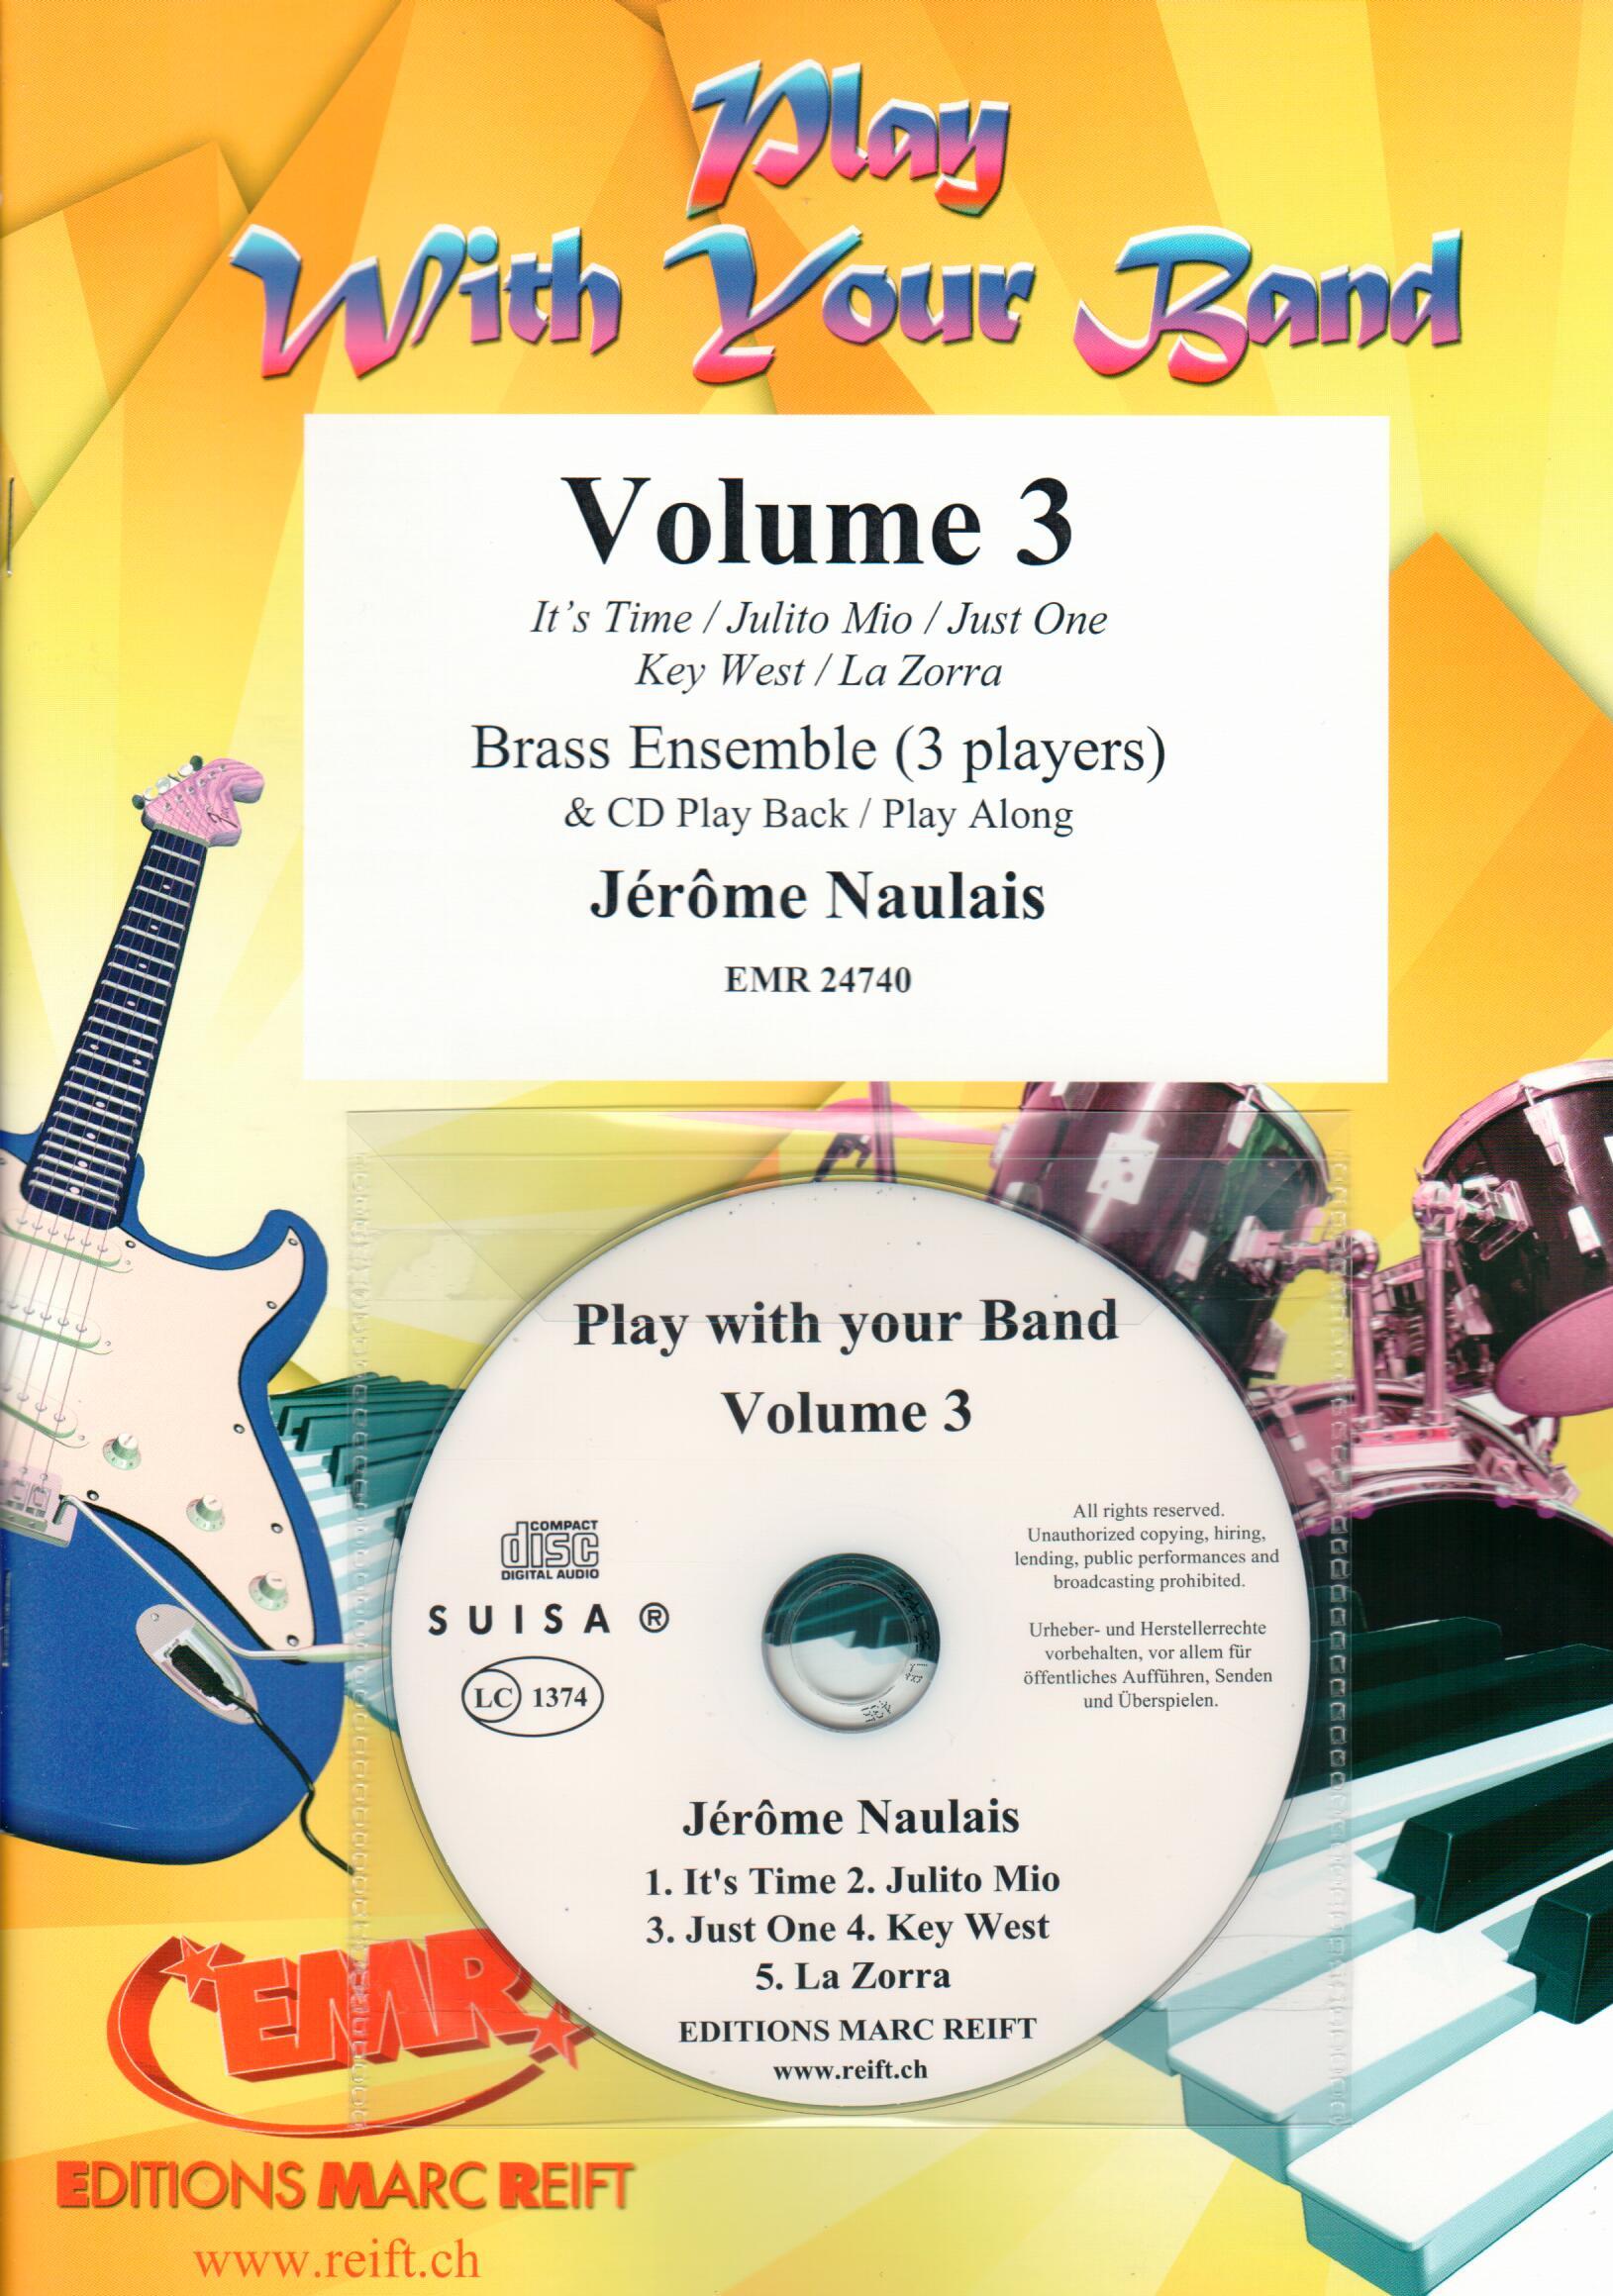 PLAY WITH YOUR BAND VOLUME 3, Trios